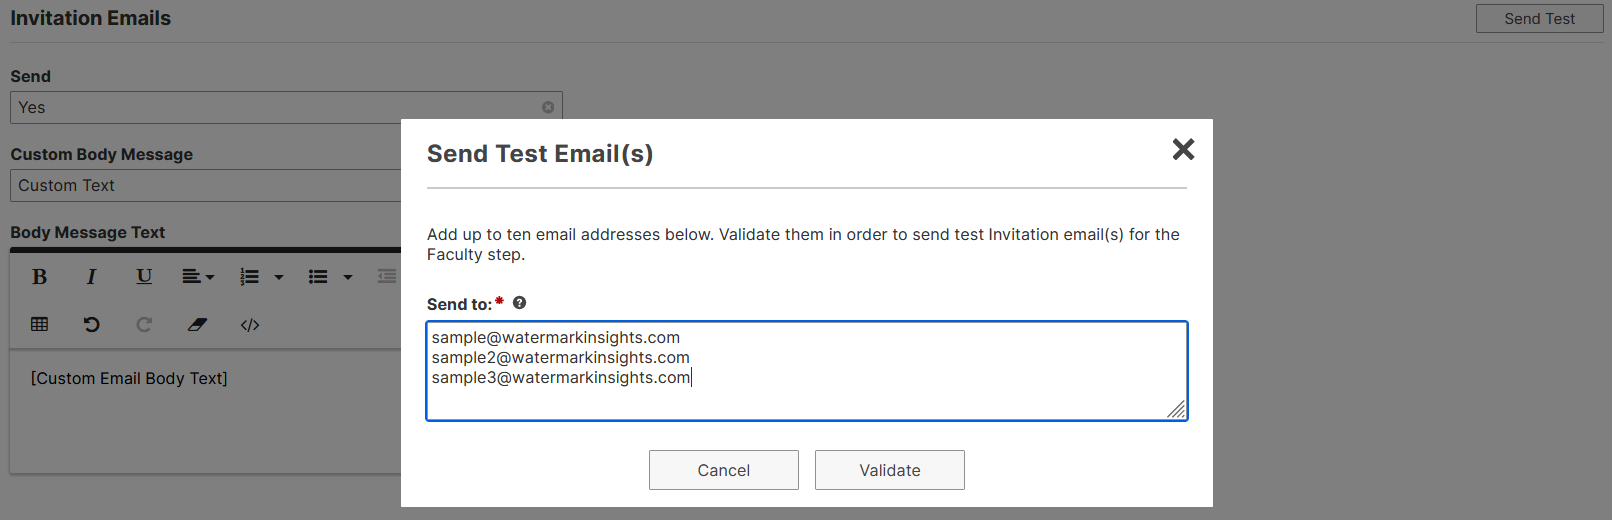 wf-emailsettings-validate.png